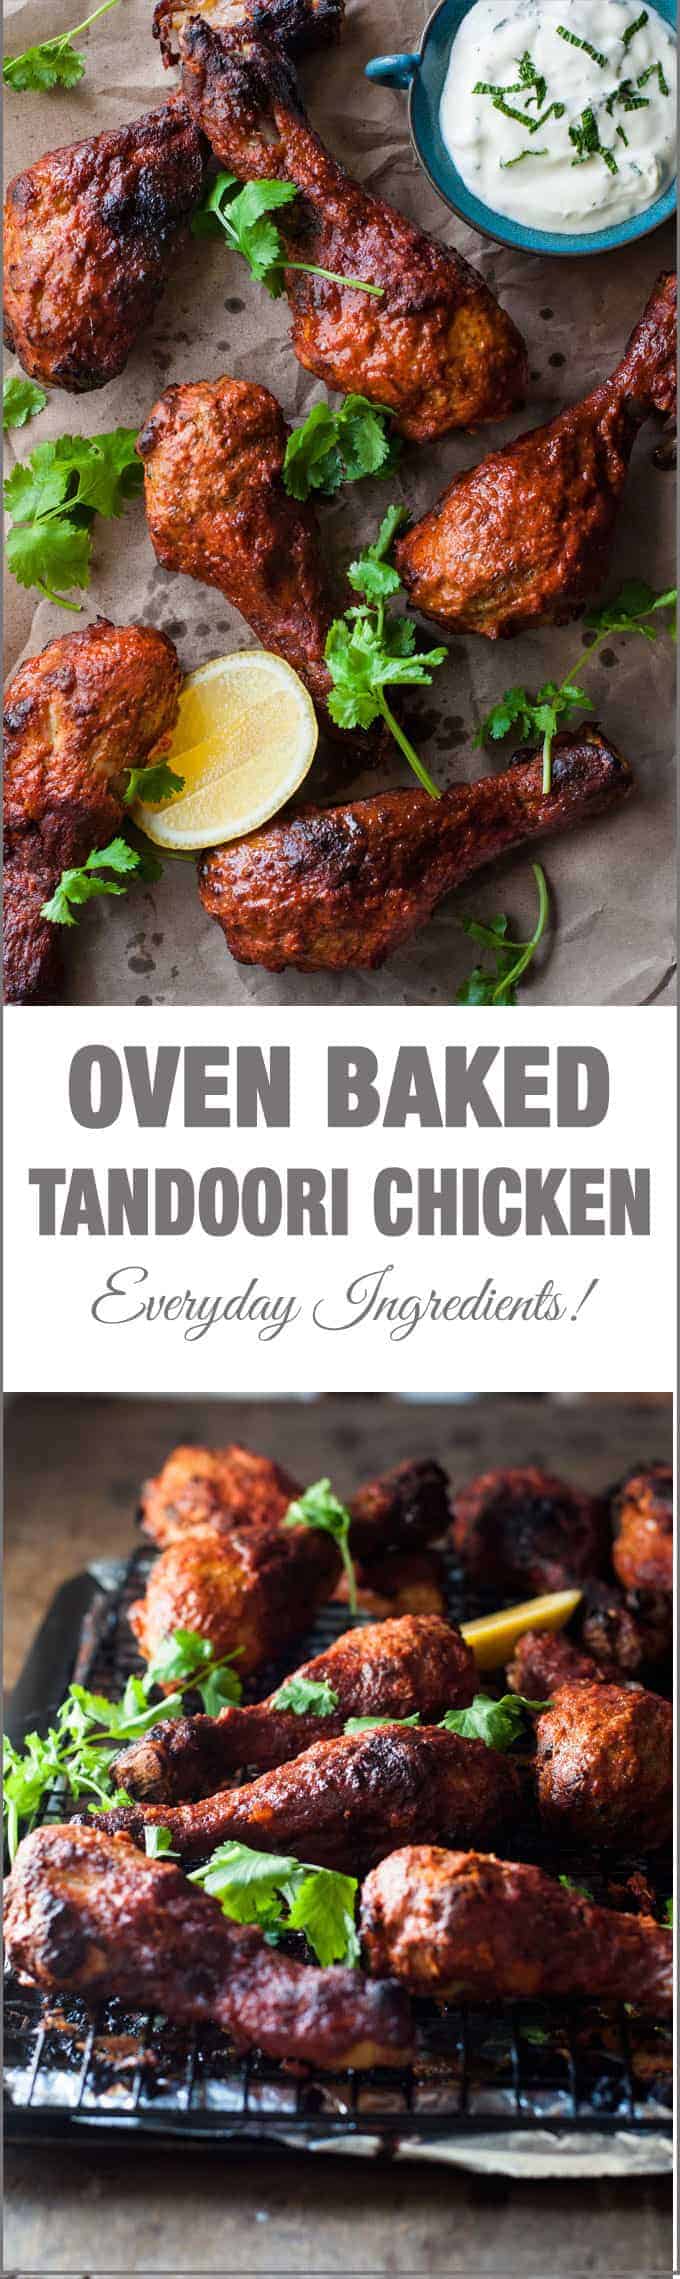 Oven Baked Tandoori Chicken - made from scratch with everyday ingredients, the flavour of this is authentic!